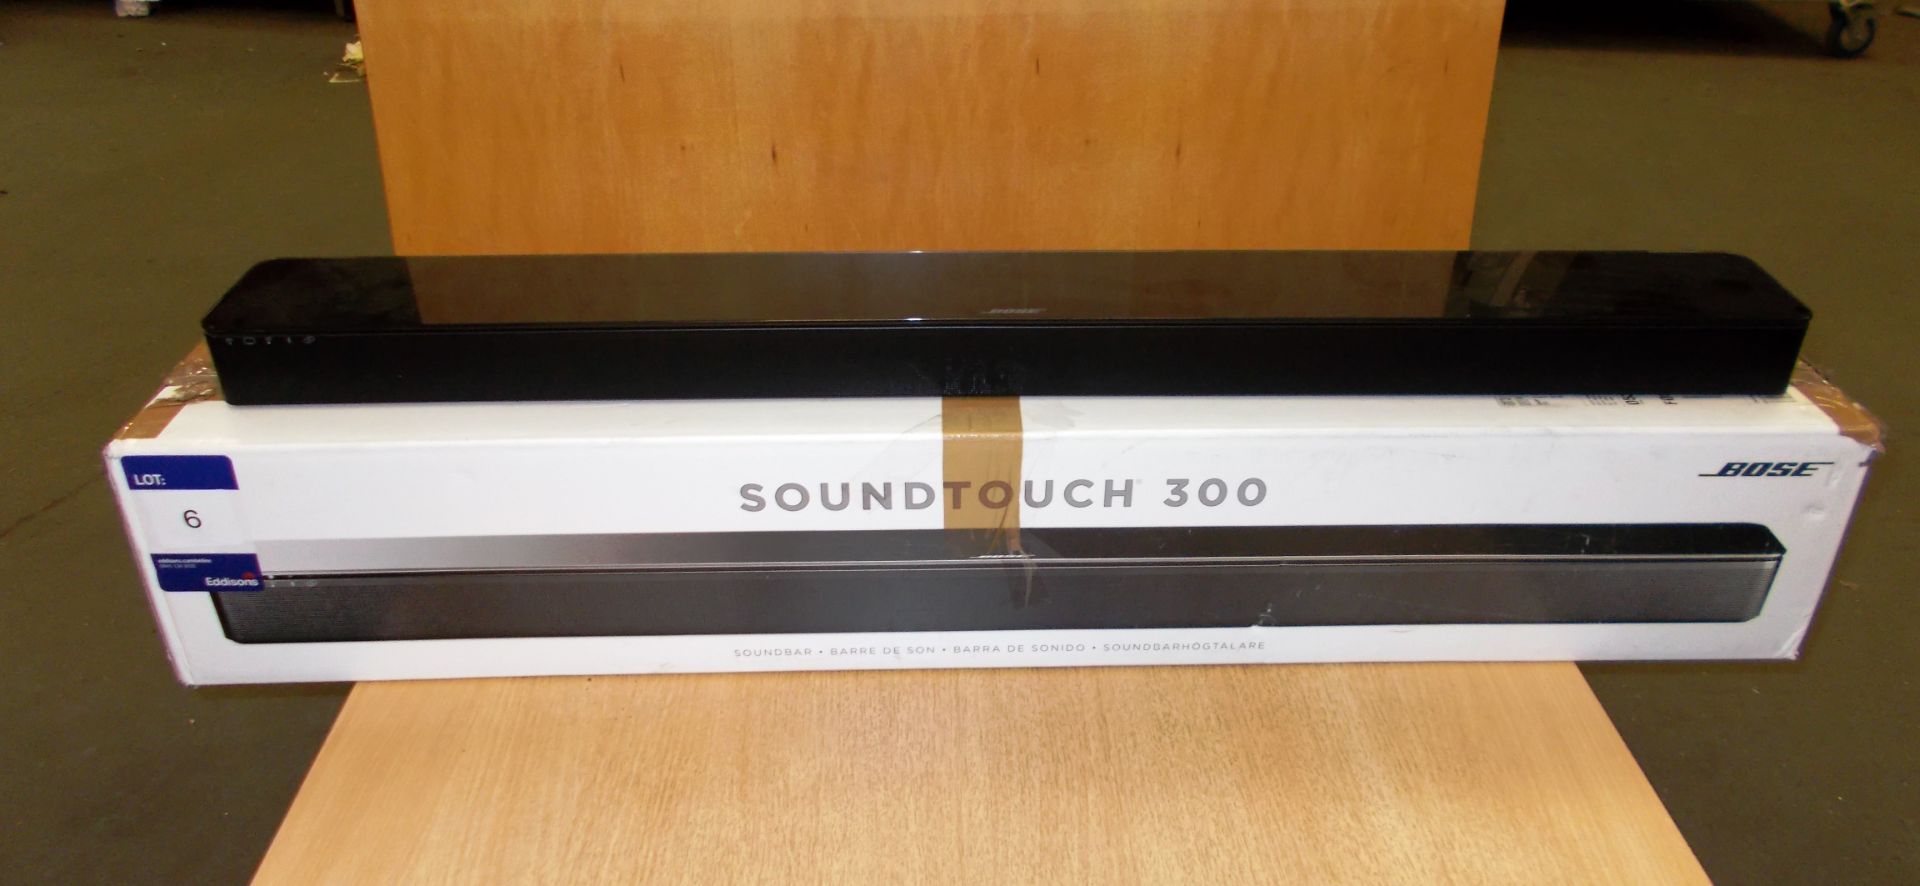 Bose Sound Touch 300 Sound Bar (on display) – RRP £699 (collection Monday 29 April ONLY - please